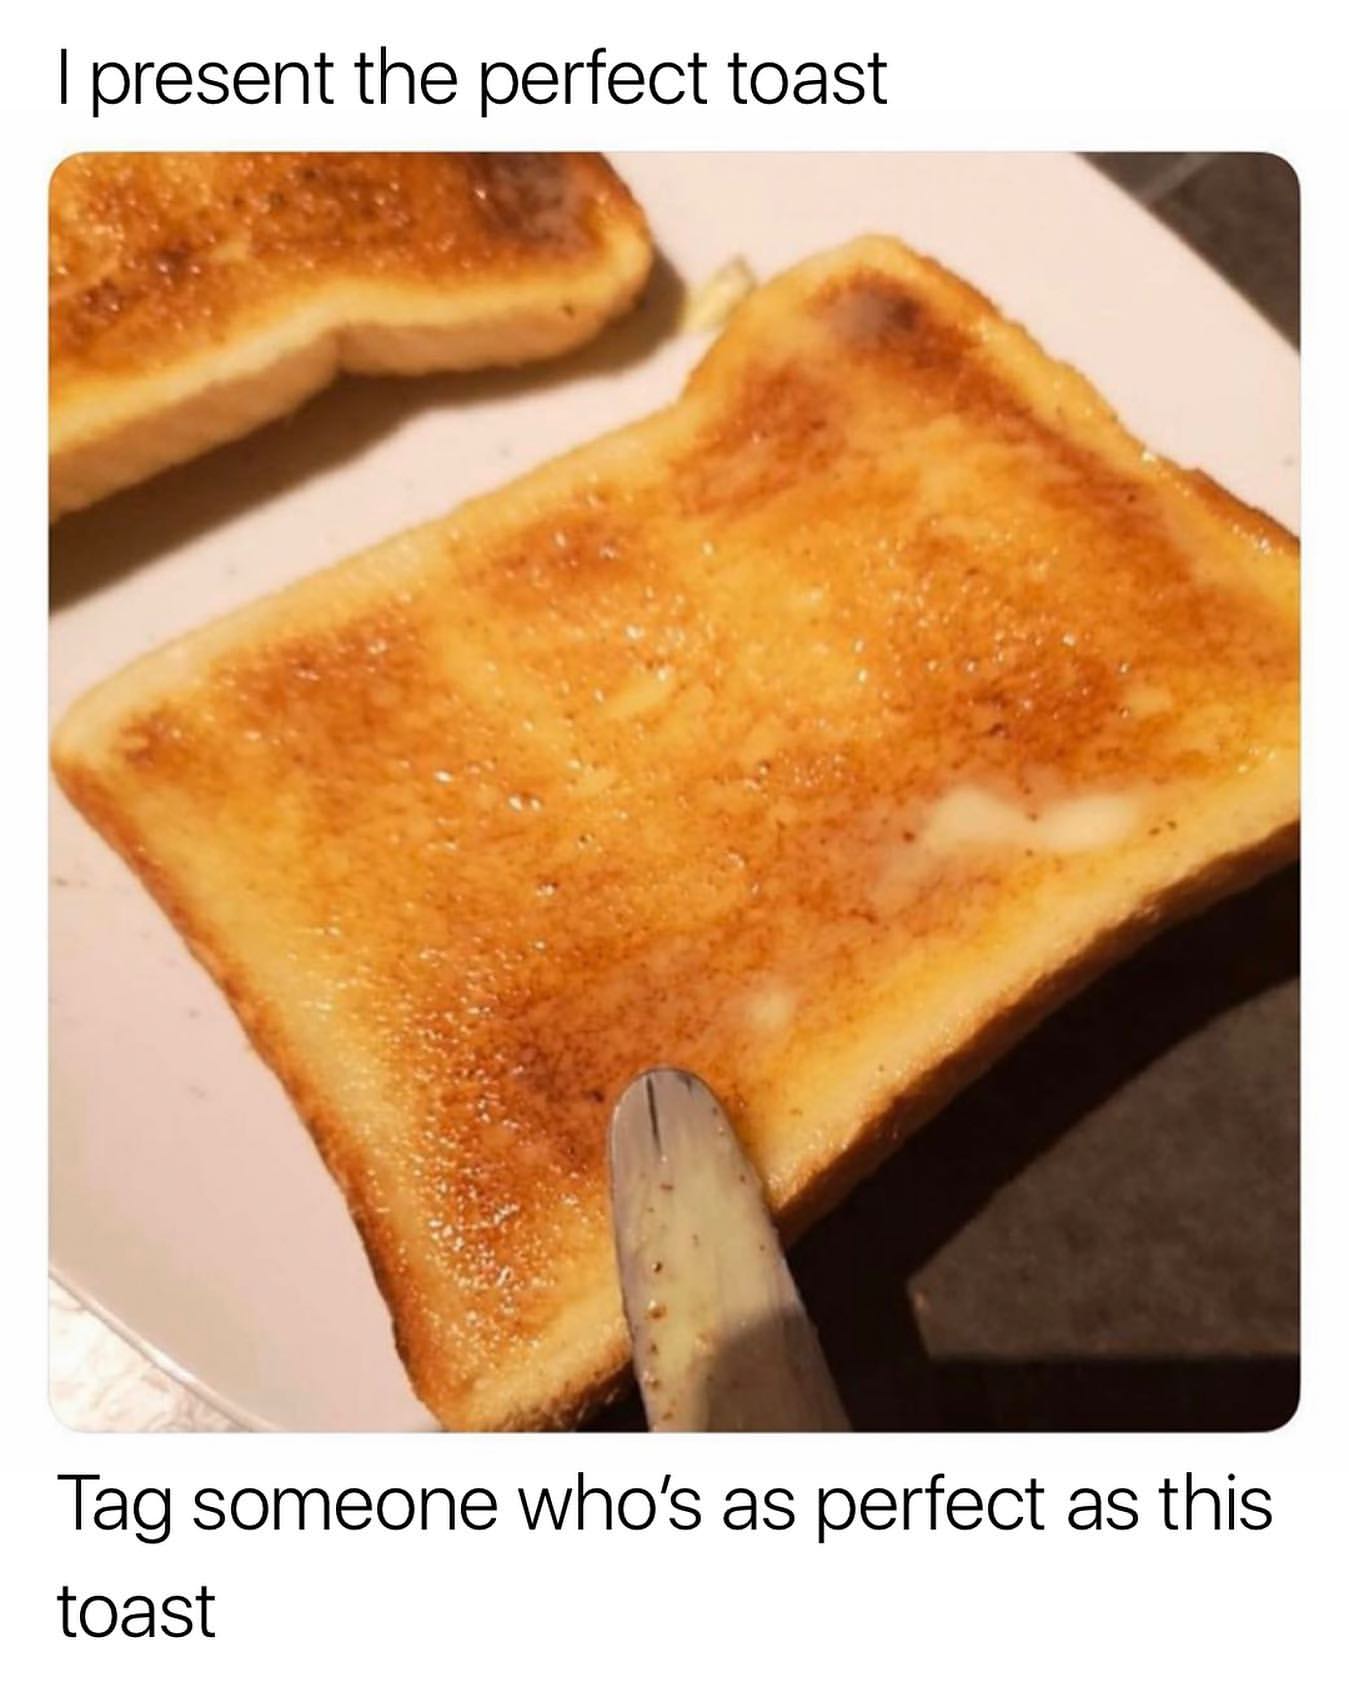 I present the perfect toast. Tag someone who's as perfect as this toast.